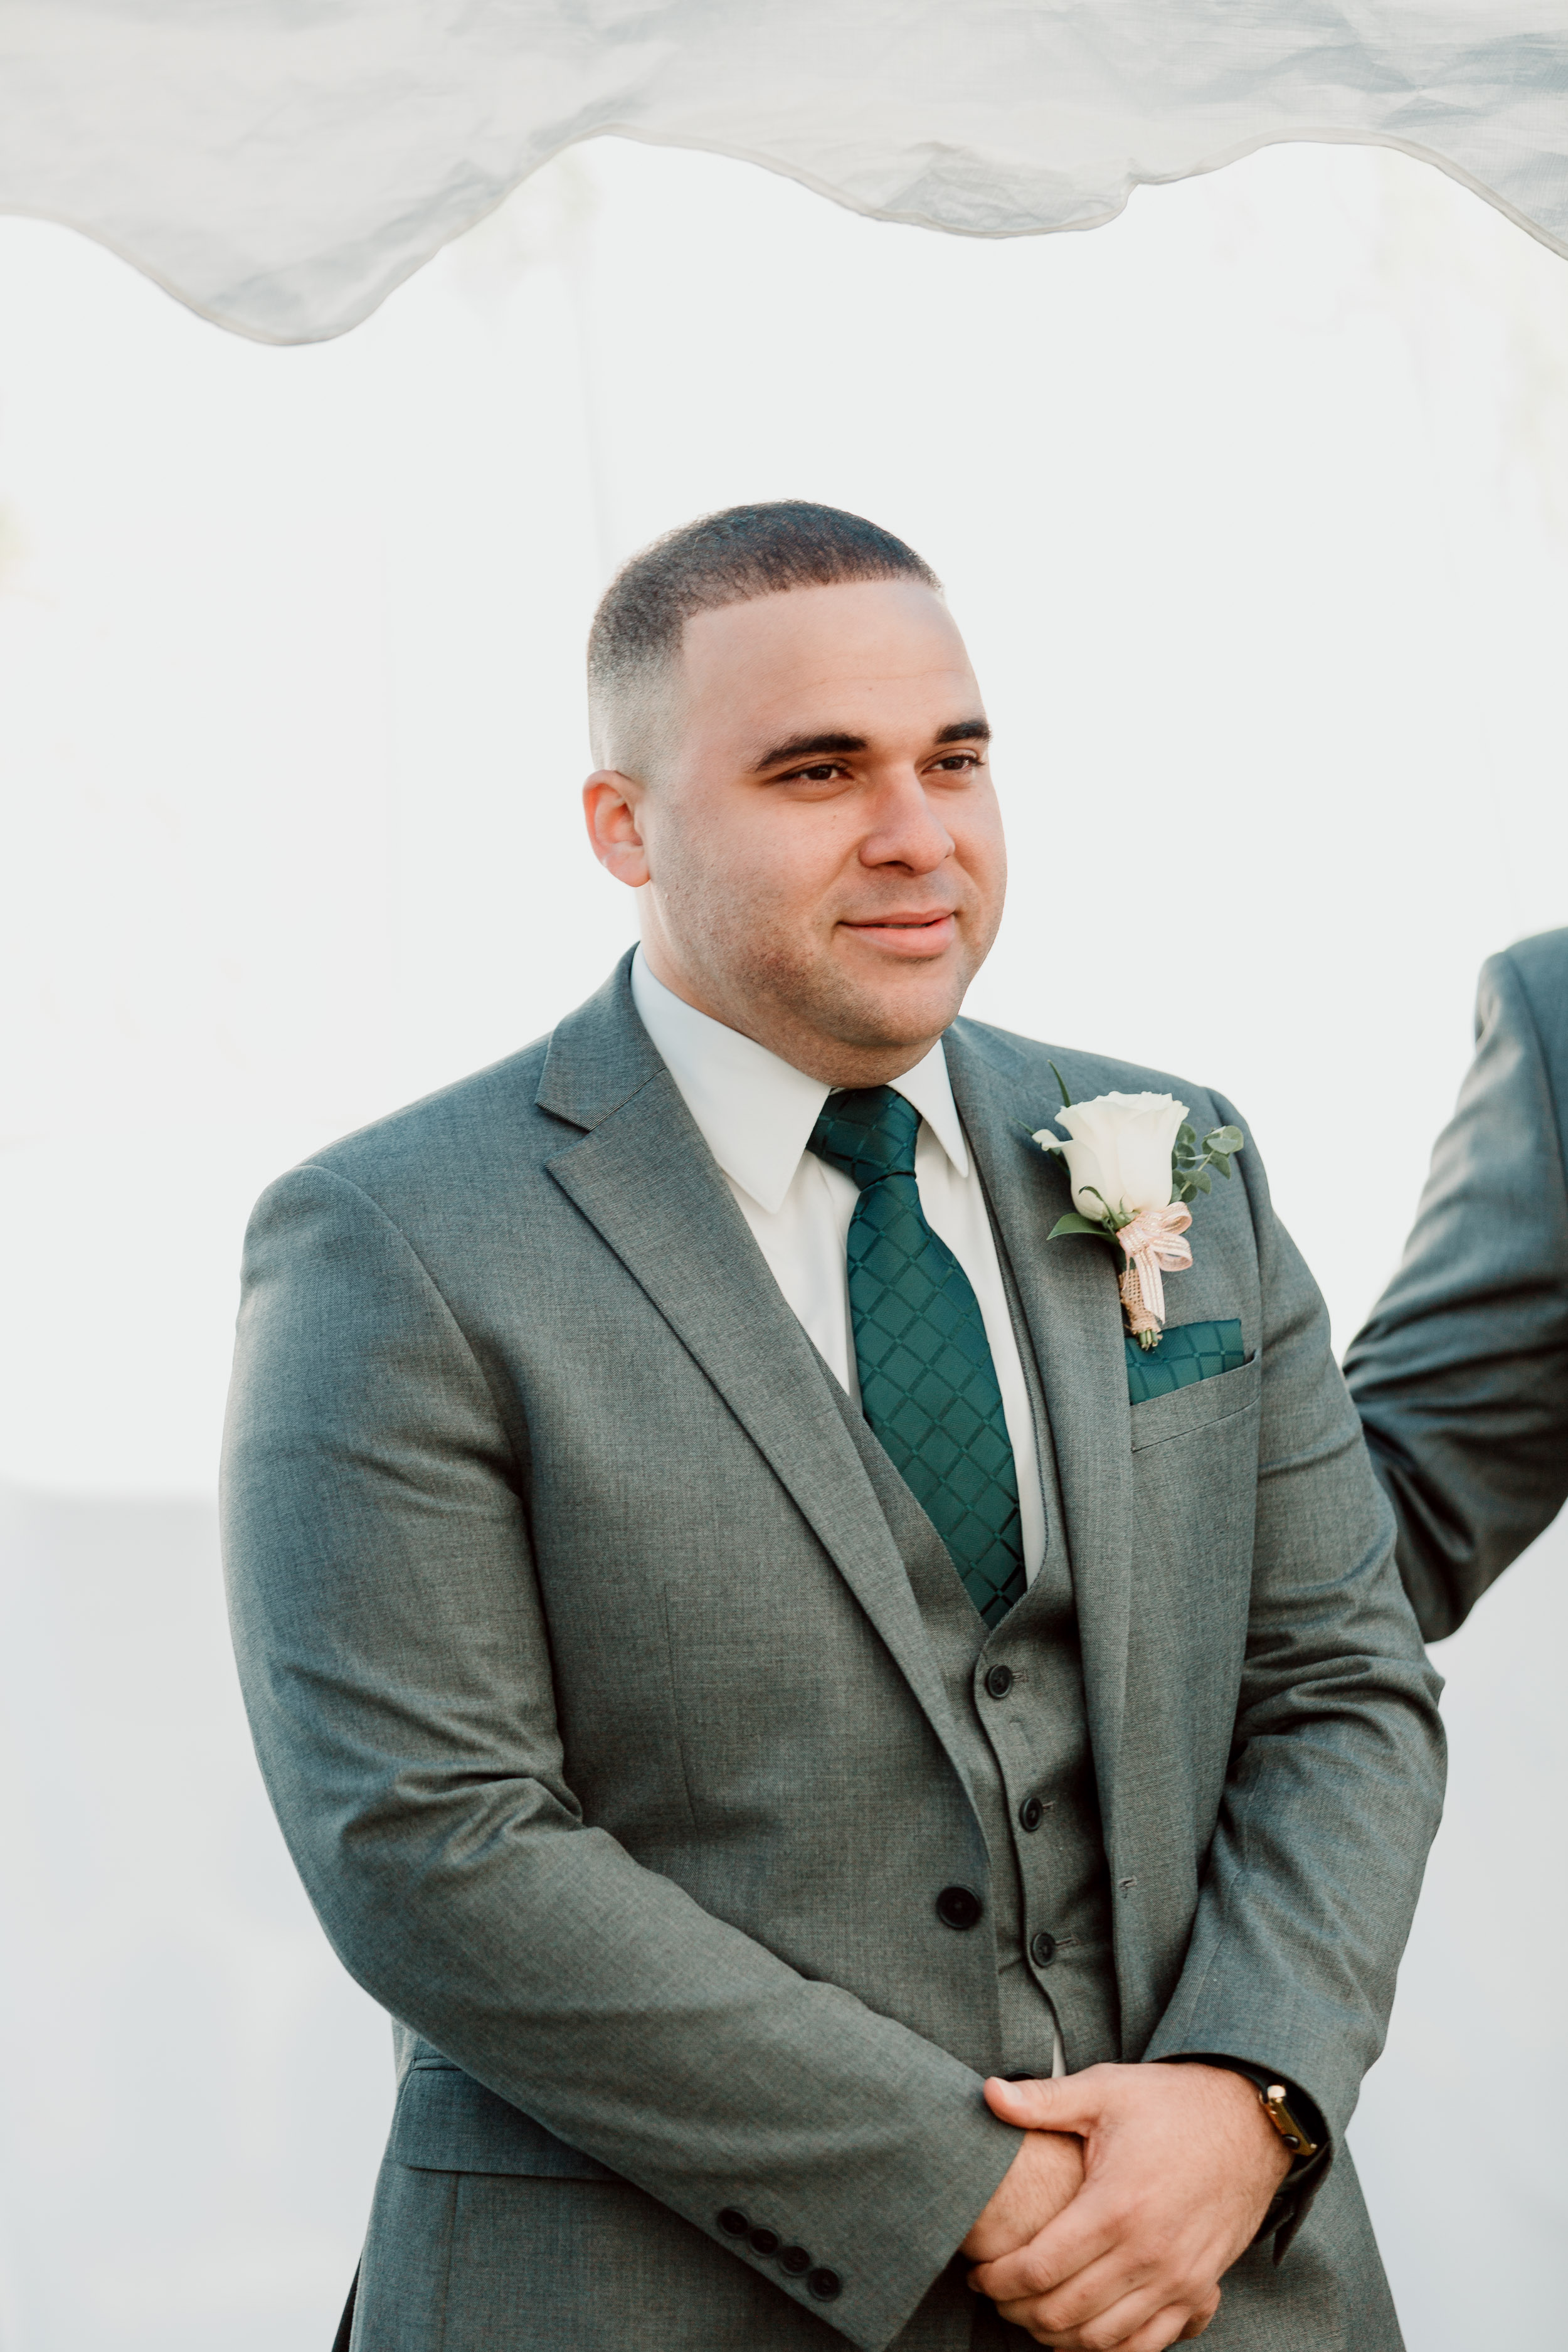 Groom first look | Backyard Chicago Wedding | Engagement Ring | Hair Pin | Emotional Chicago Wedding | Historic Downtown Riverside Wedding Photos | Chicago Wedding Photographer | Metra Station Wedding Photos | Small Weddings in Chicago | Intimate Elopements in Chicago